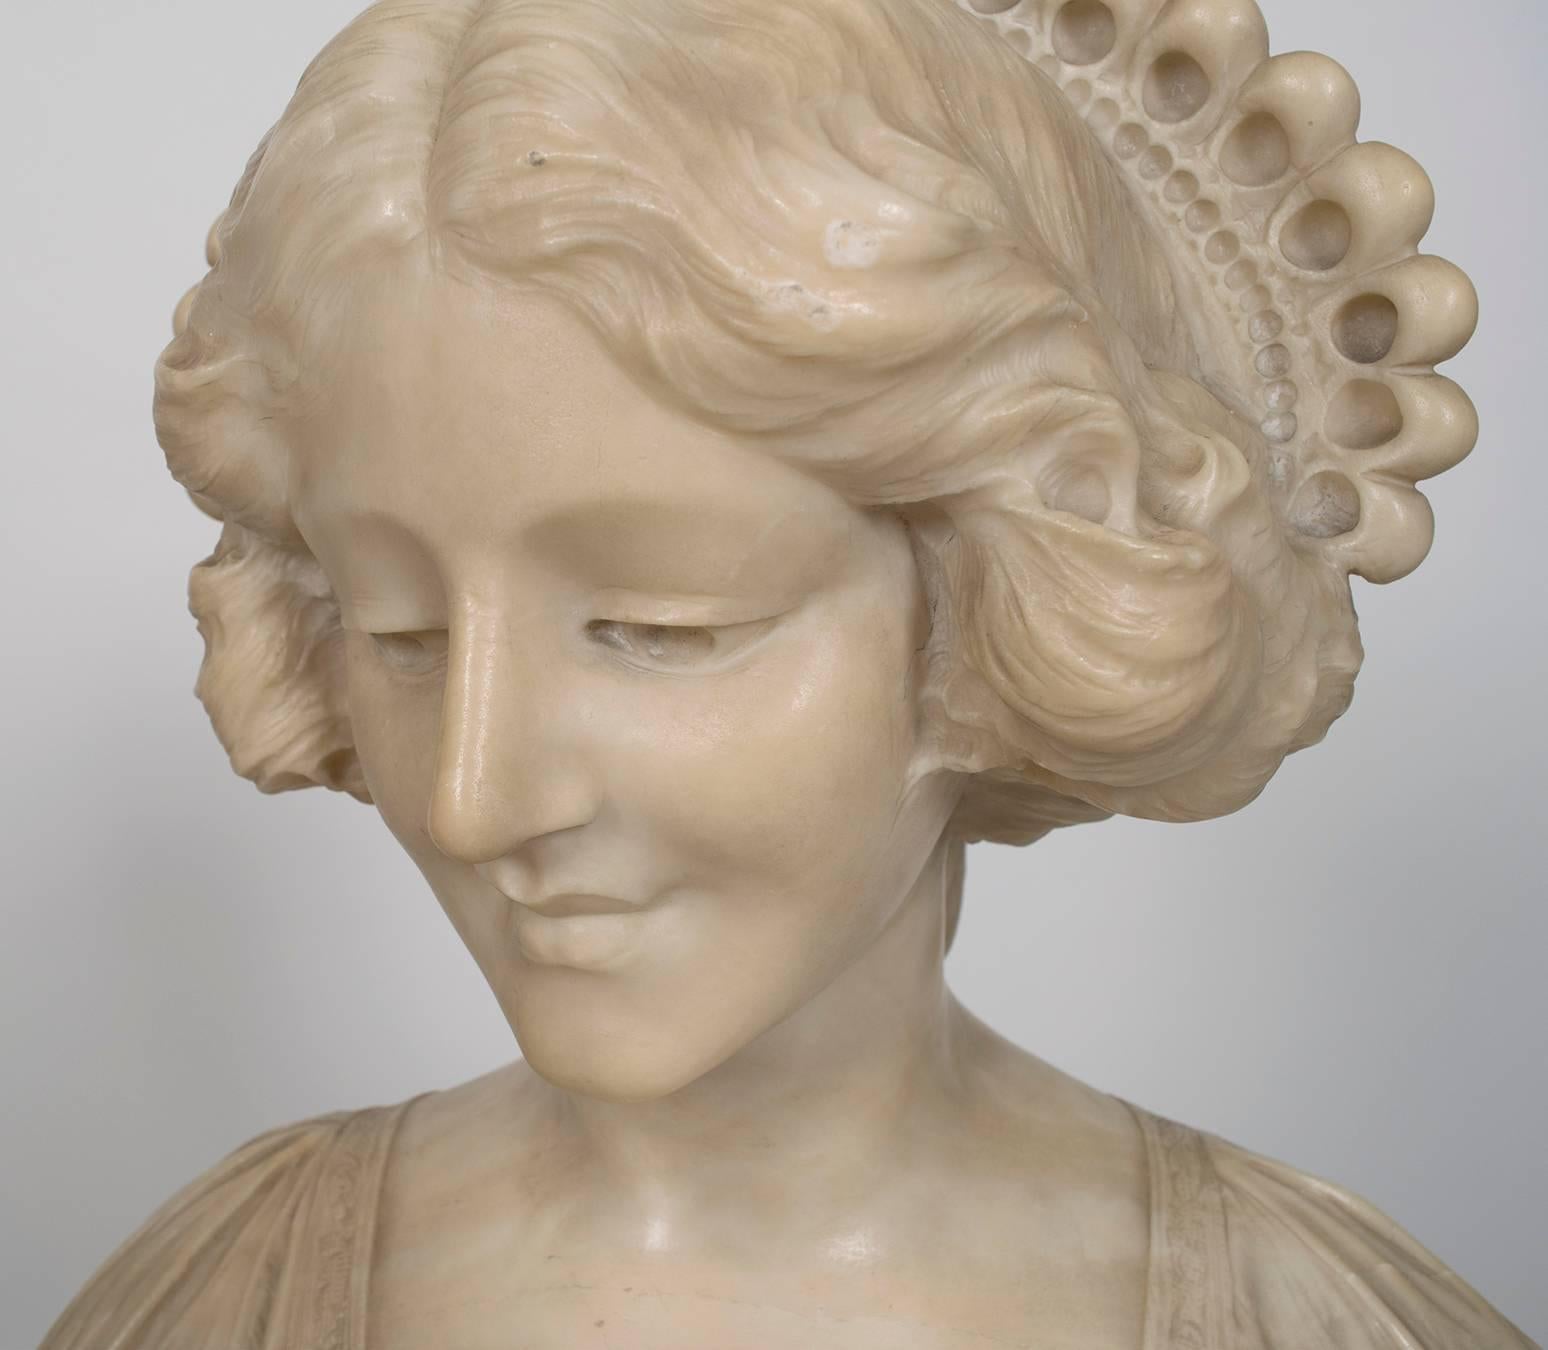 A lovely Italian marble female bust with original marble pedestal, early 20th century. Dimensions below are for pedestal with bust. Pedestal alone measures 39.5" H x 16.75" W x 12" D. Bust alone measures 17" H x 15.5" W x